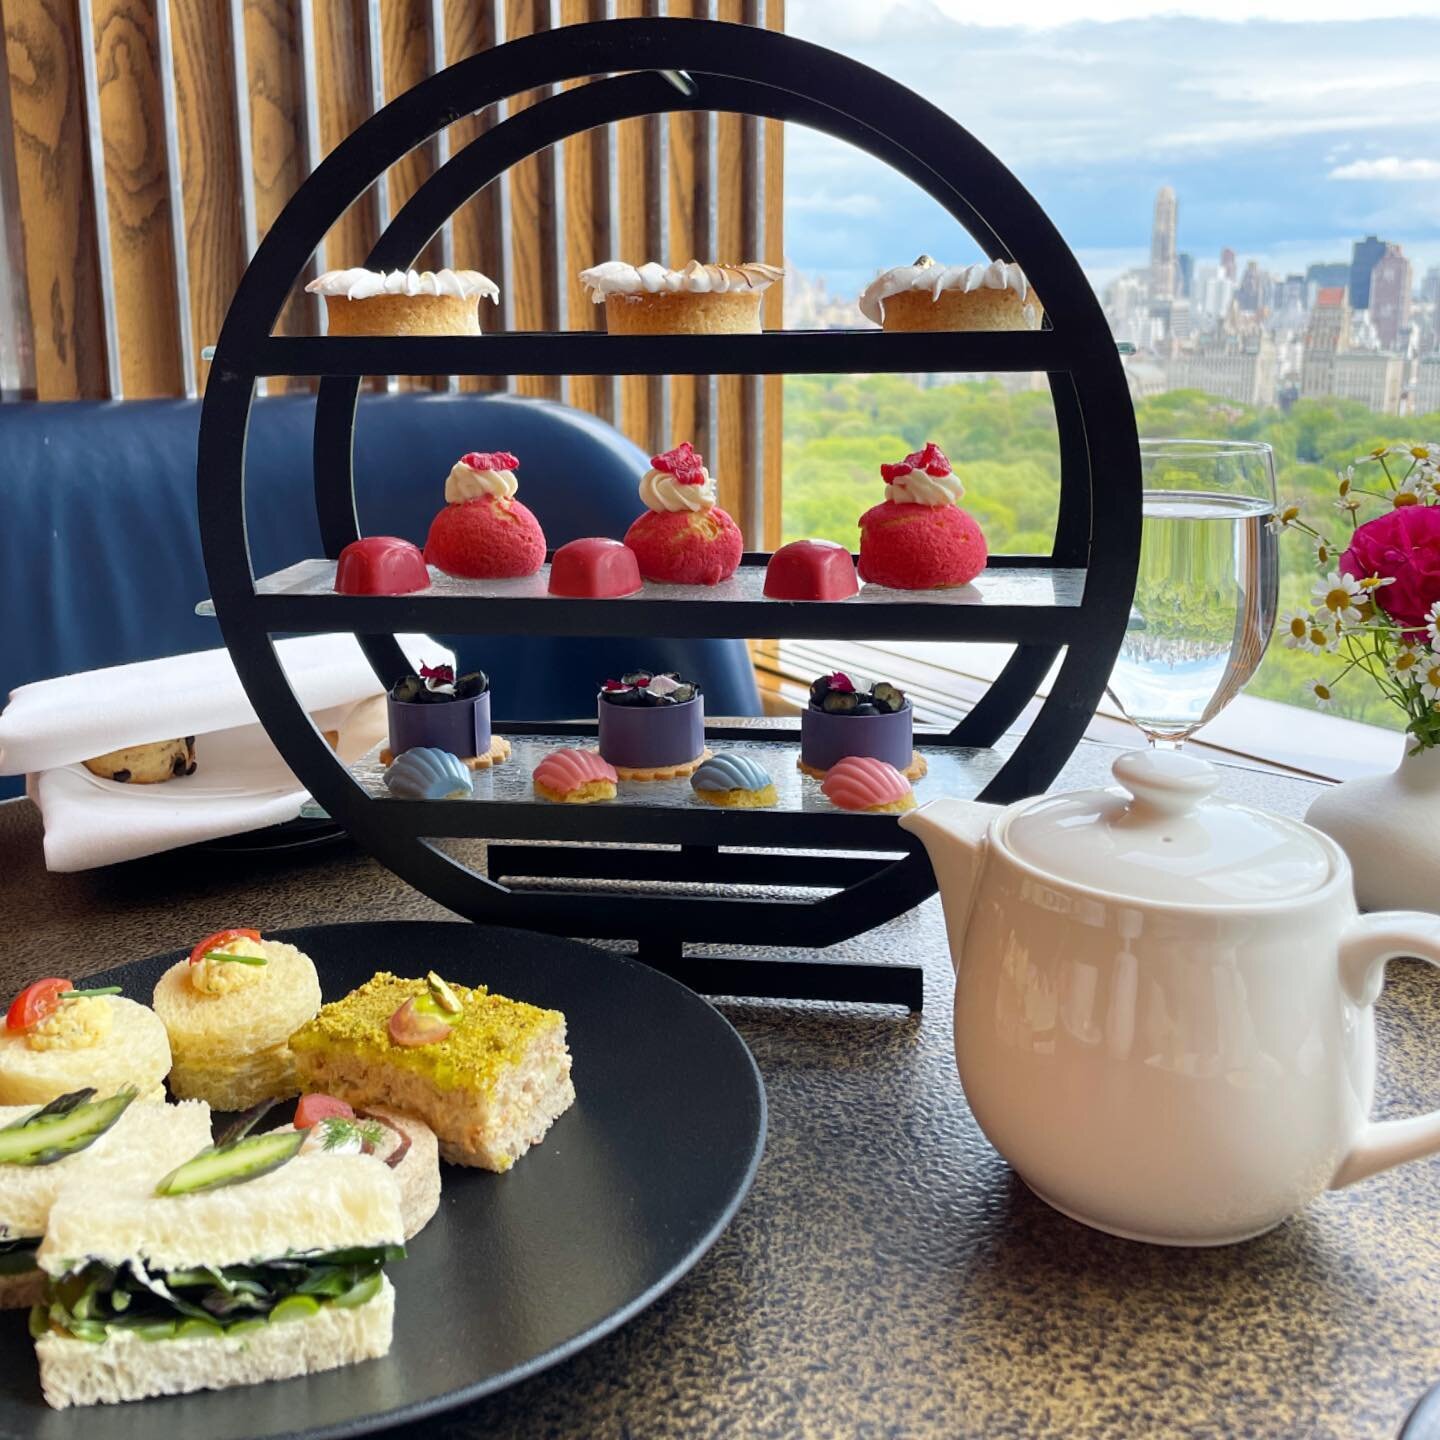 PSA: @mo_newyork has relaunched tea just for the month of May. Swing by soon so you too can try these teeny sammies and delightful cream puffs while gazing at Central Park in bloom.